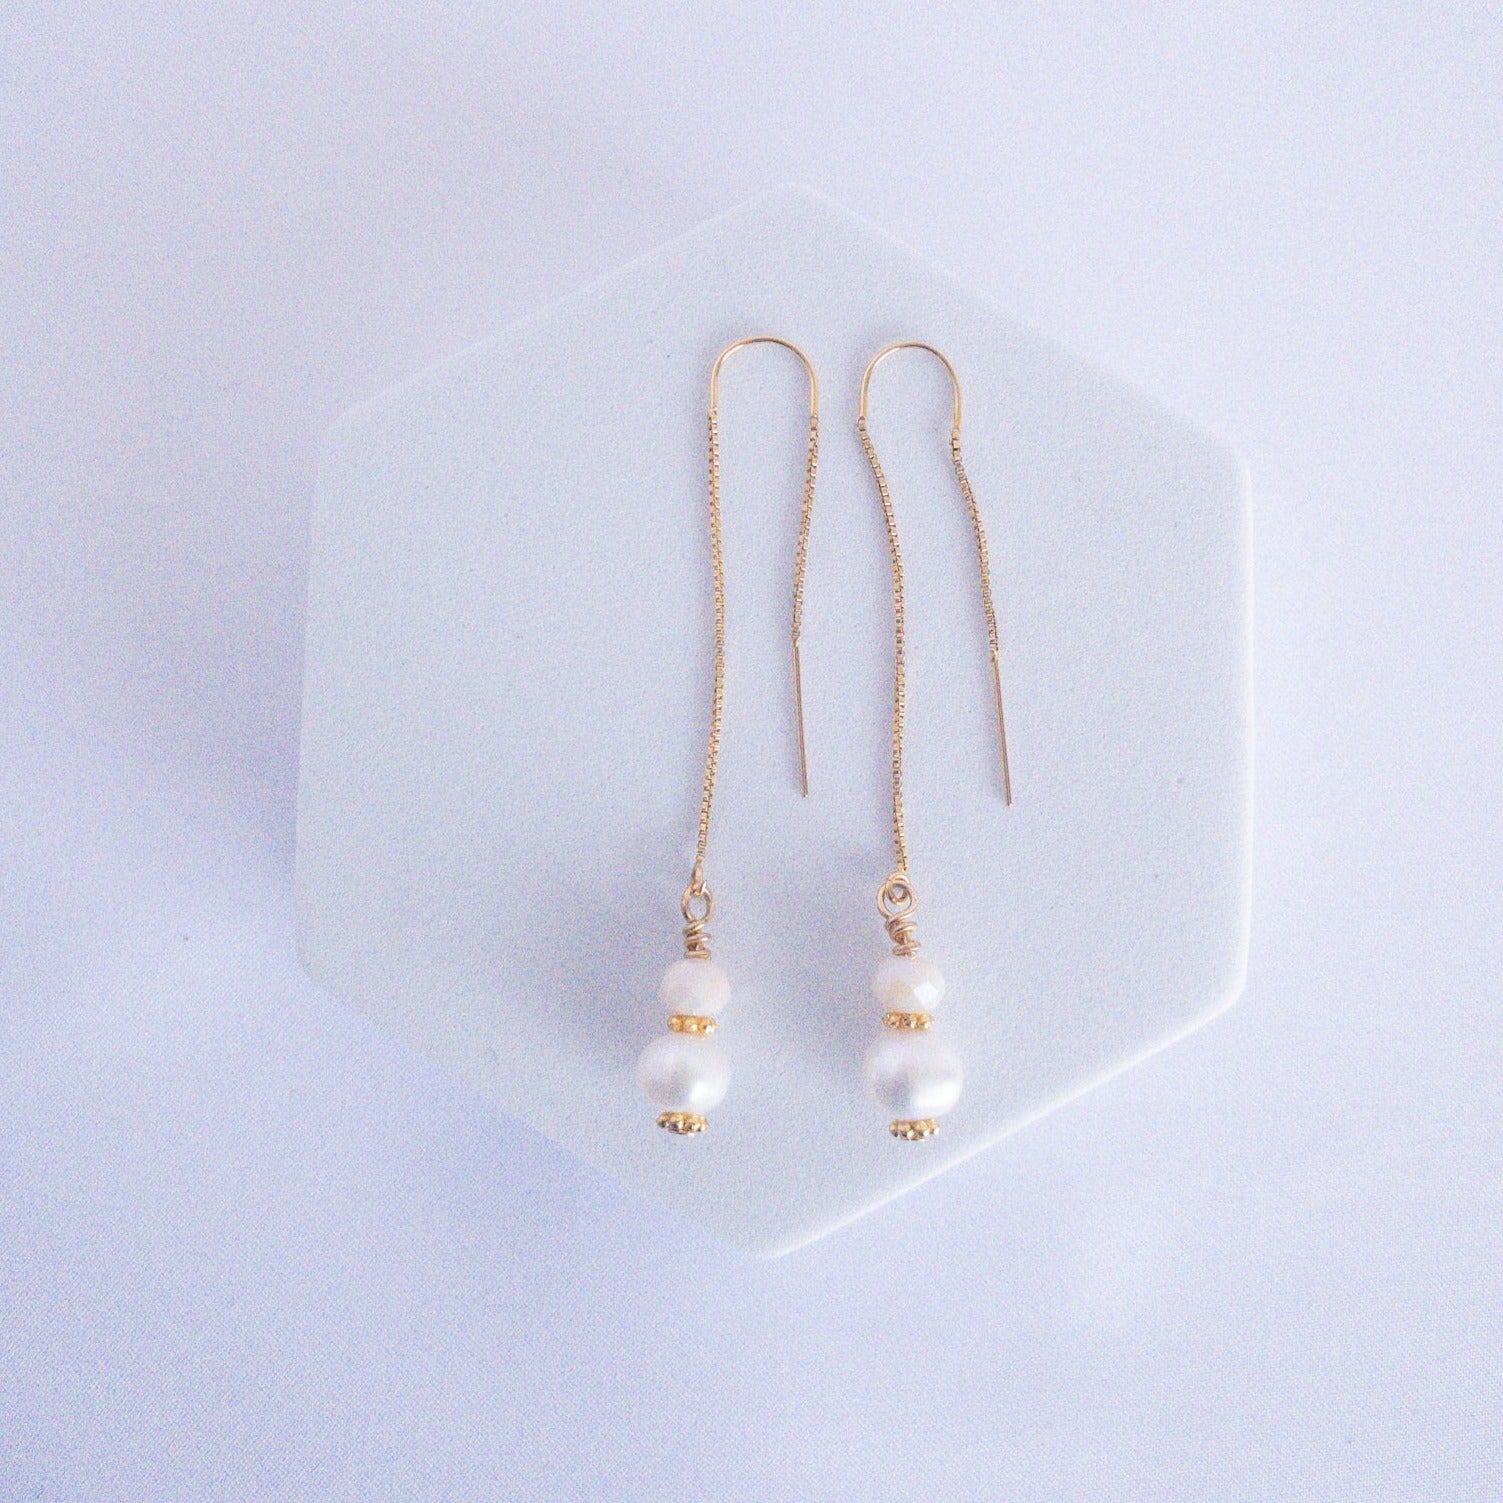 Pearl threaders 14k gold filled